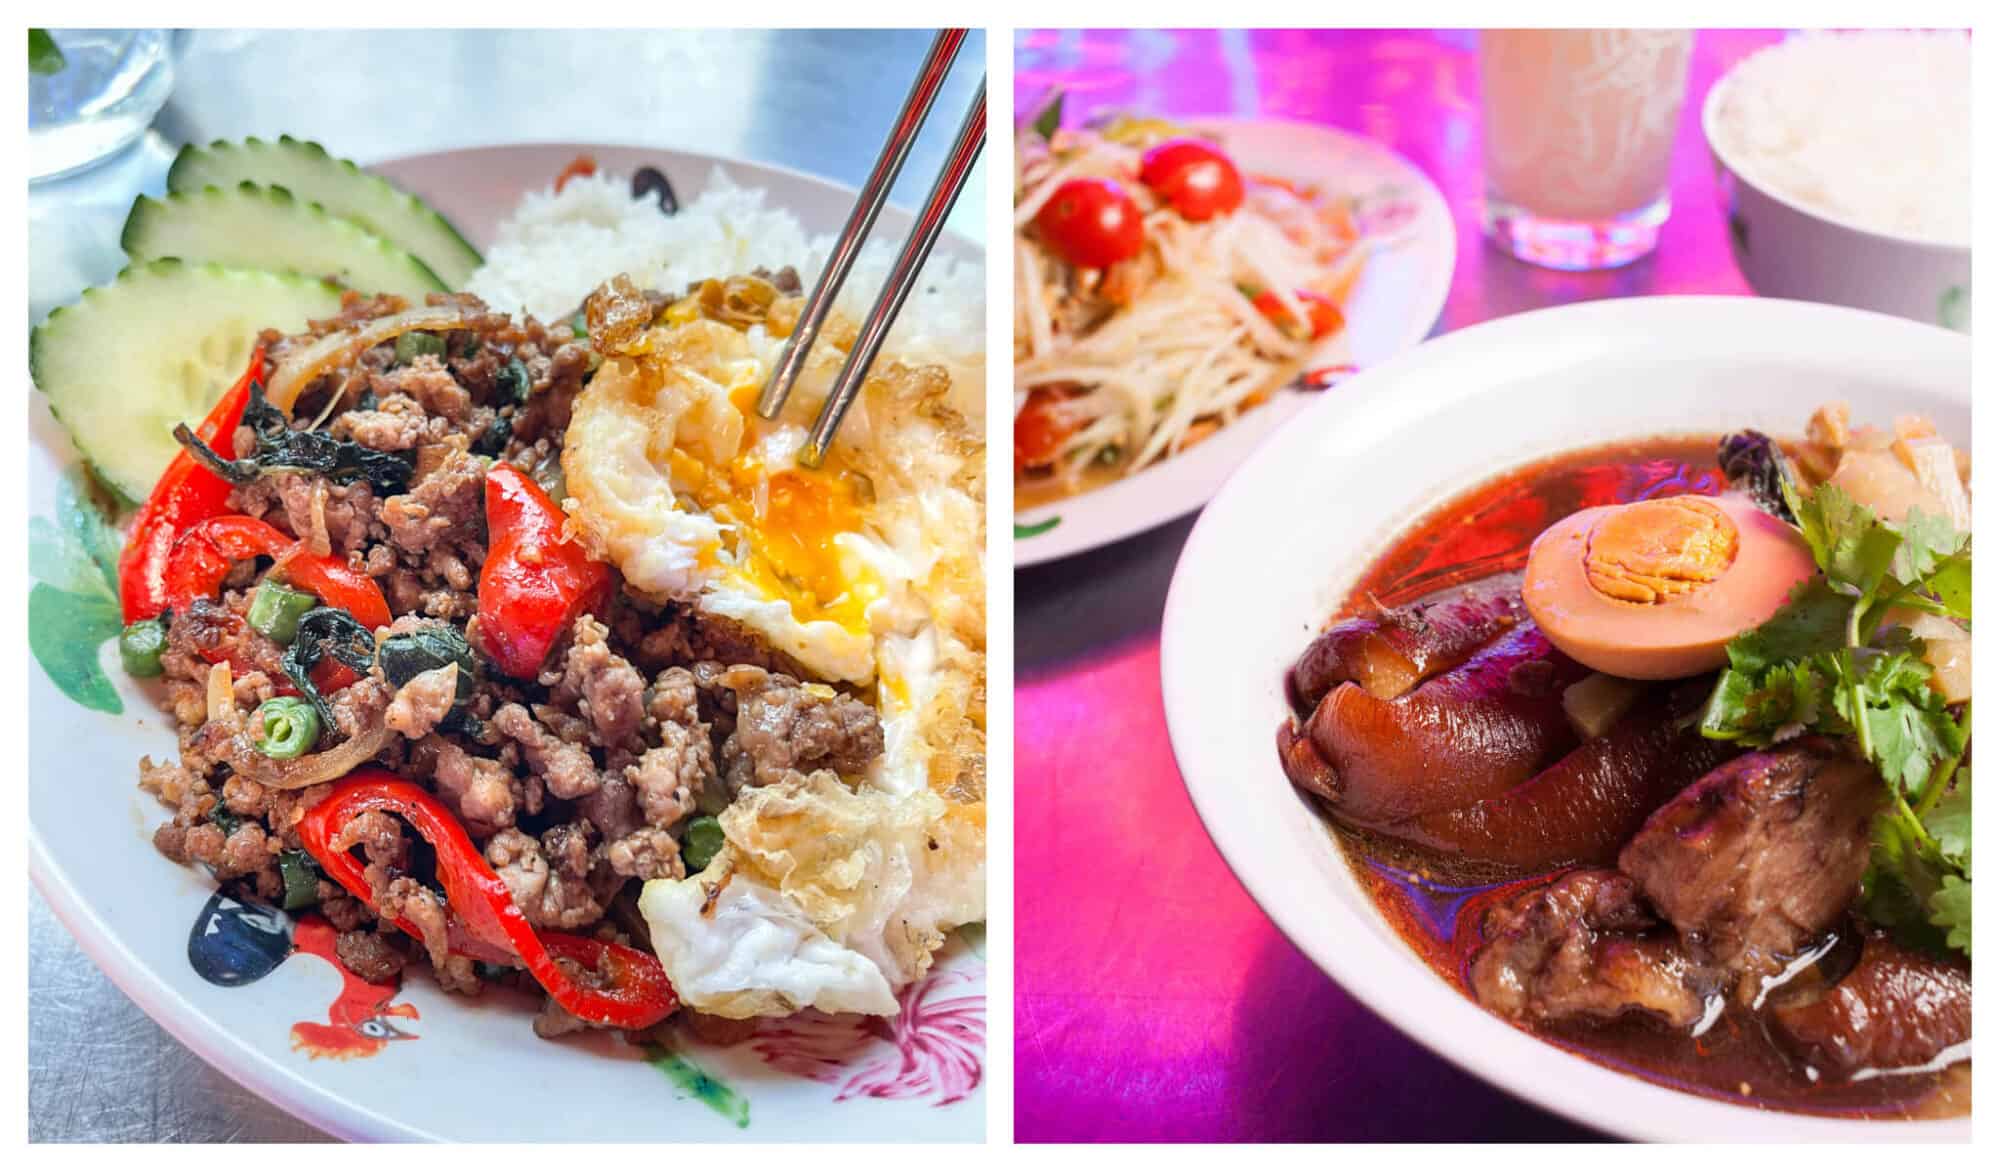 Left: A dish with cooked ground pork, red peppers and a sunny side up egg. Right: A brown stew with pork and hard boiled egg.